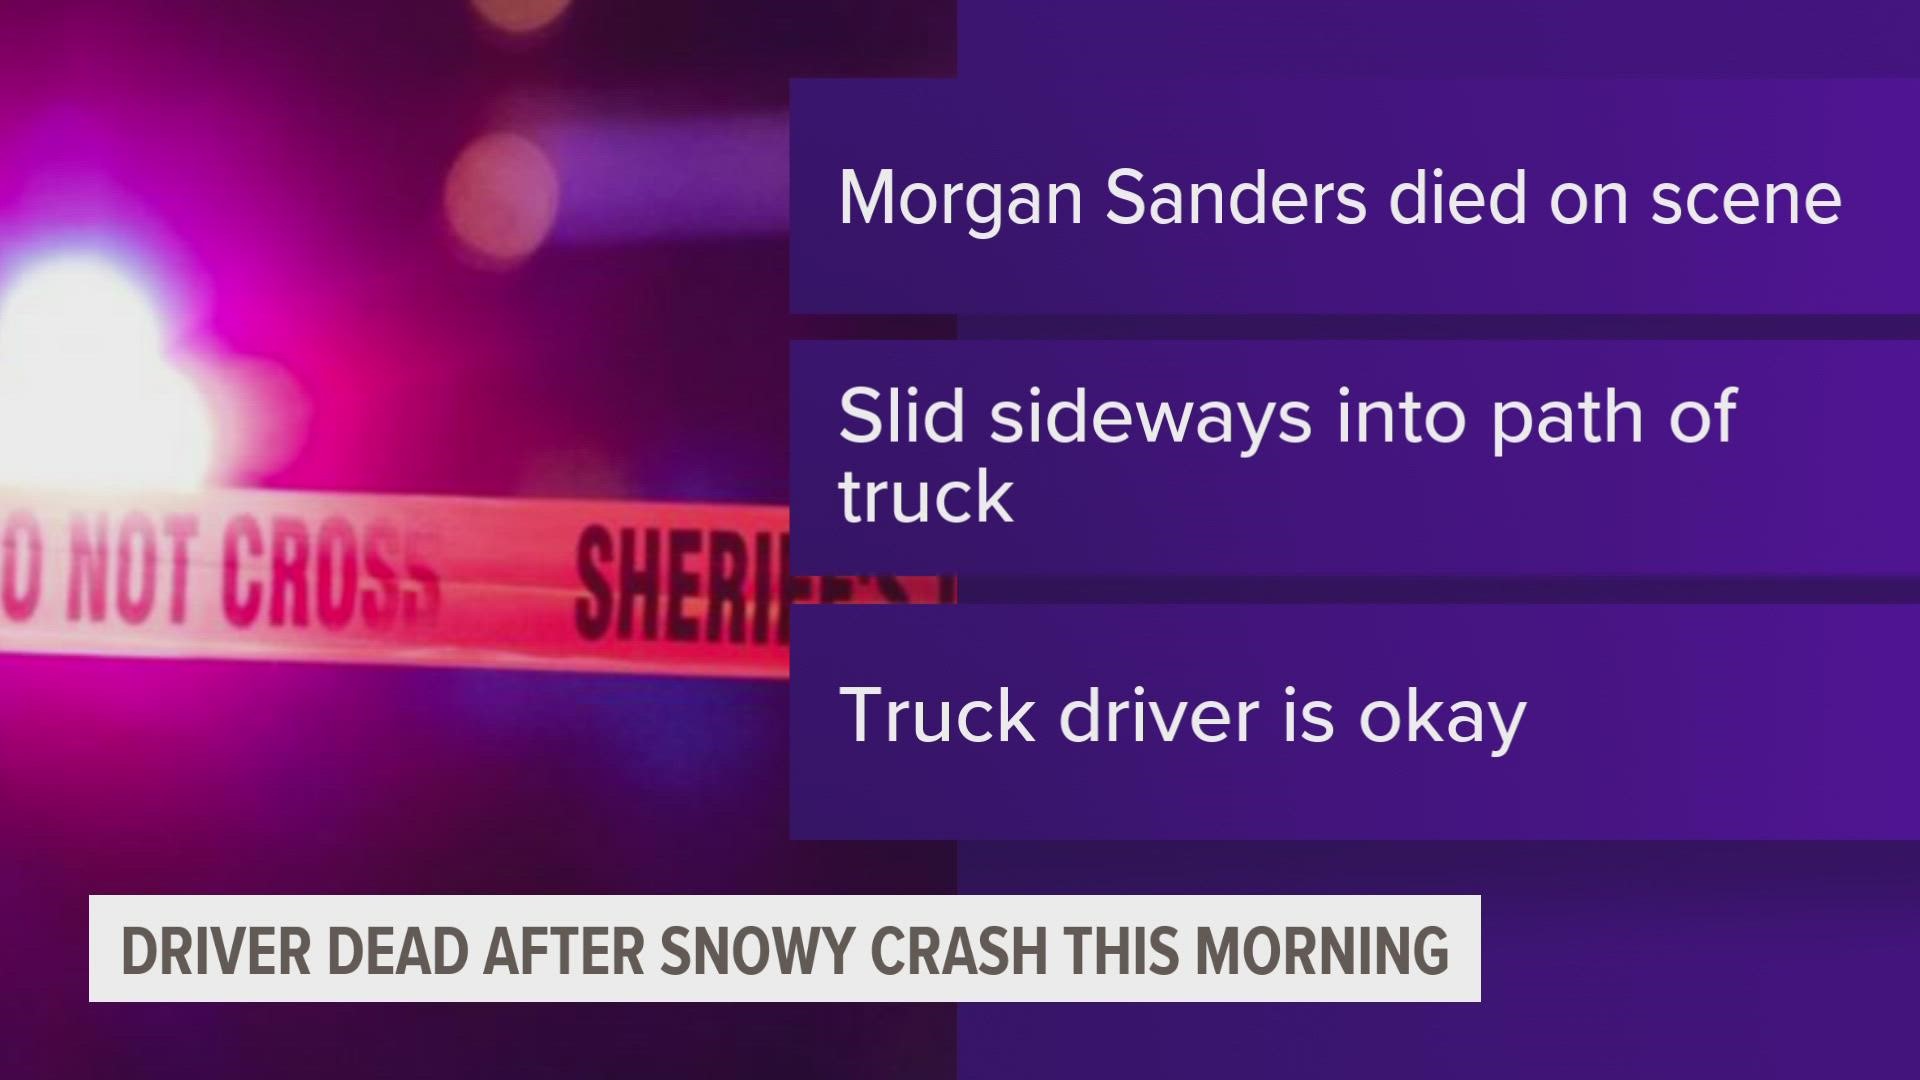 Preliminary investigation indicates that Sanders was travelling northbound when he lost control of his vehicle "due to snowy conditions".